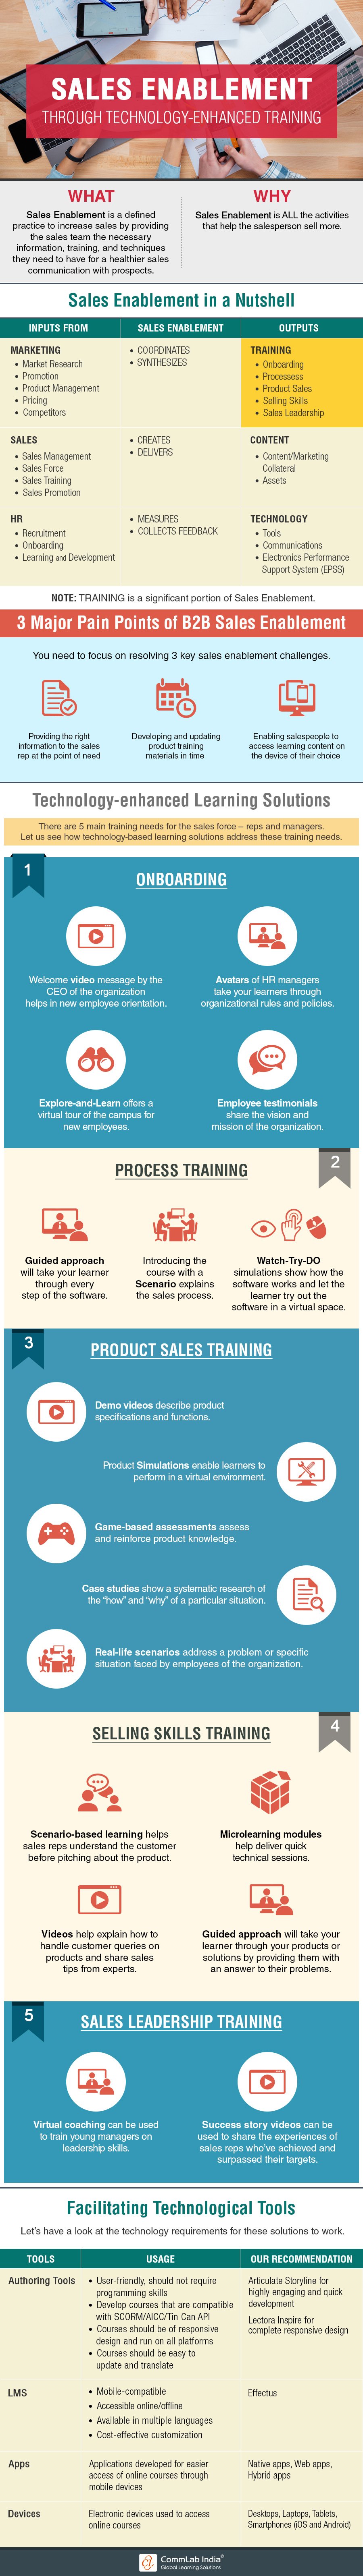 Sales Enablement through Technology-Enhanced Training[Infographic]